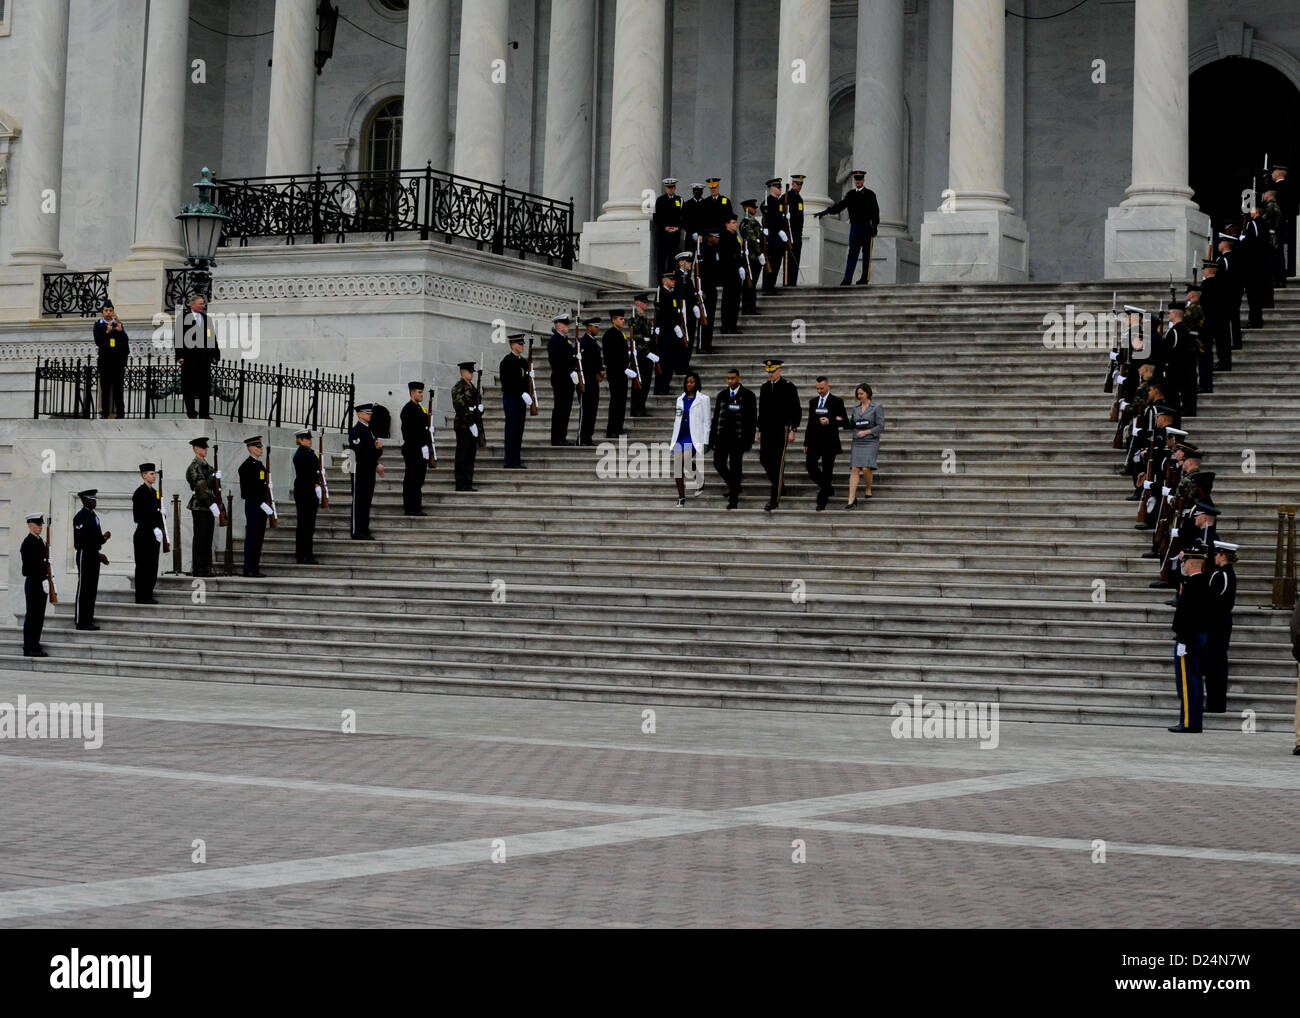 A joint honor guard salutes as role players representing the president, vice president and their spouses descend the U.S. Capitol steps during the presidential inauguration dress rehearsal in Washington, D.C., Jan. 13, 2013. Military involvement in the presidential inauguration dates back to April 30, 1789, when members of the U.S. Army, local militia units and revolutionary war veterans escorted George Washington to his first inauguration ceremony. (DoD Photo by  Staff Sgt. Wesley Farnsworth) (Released) Stock Photo